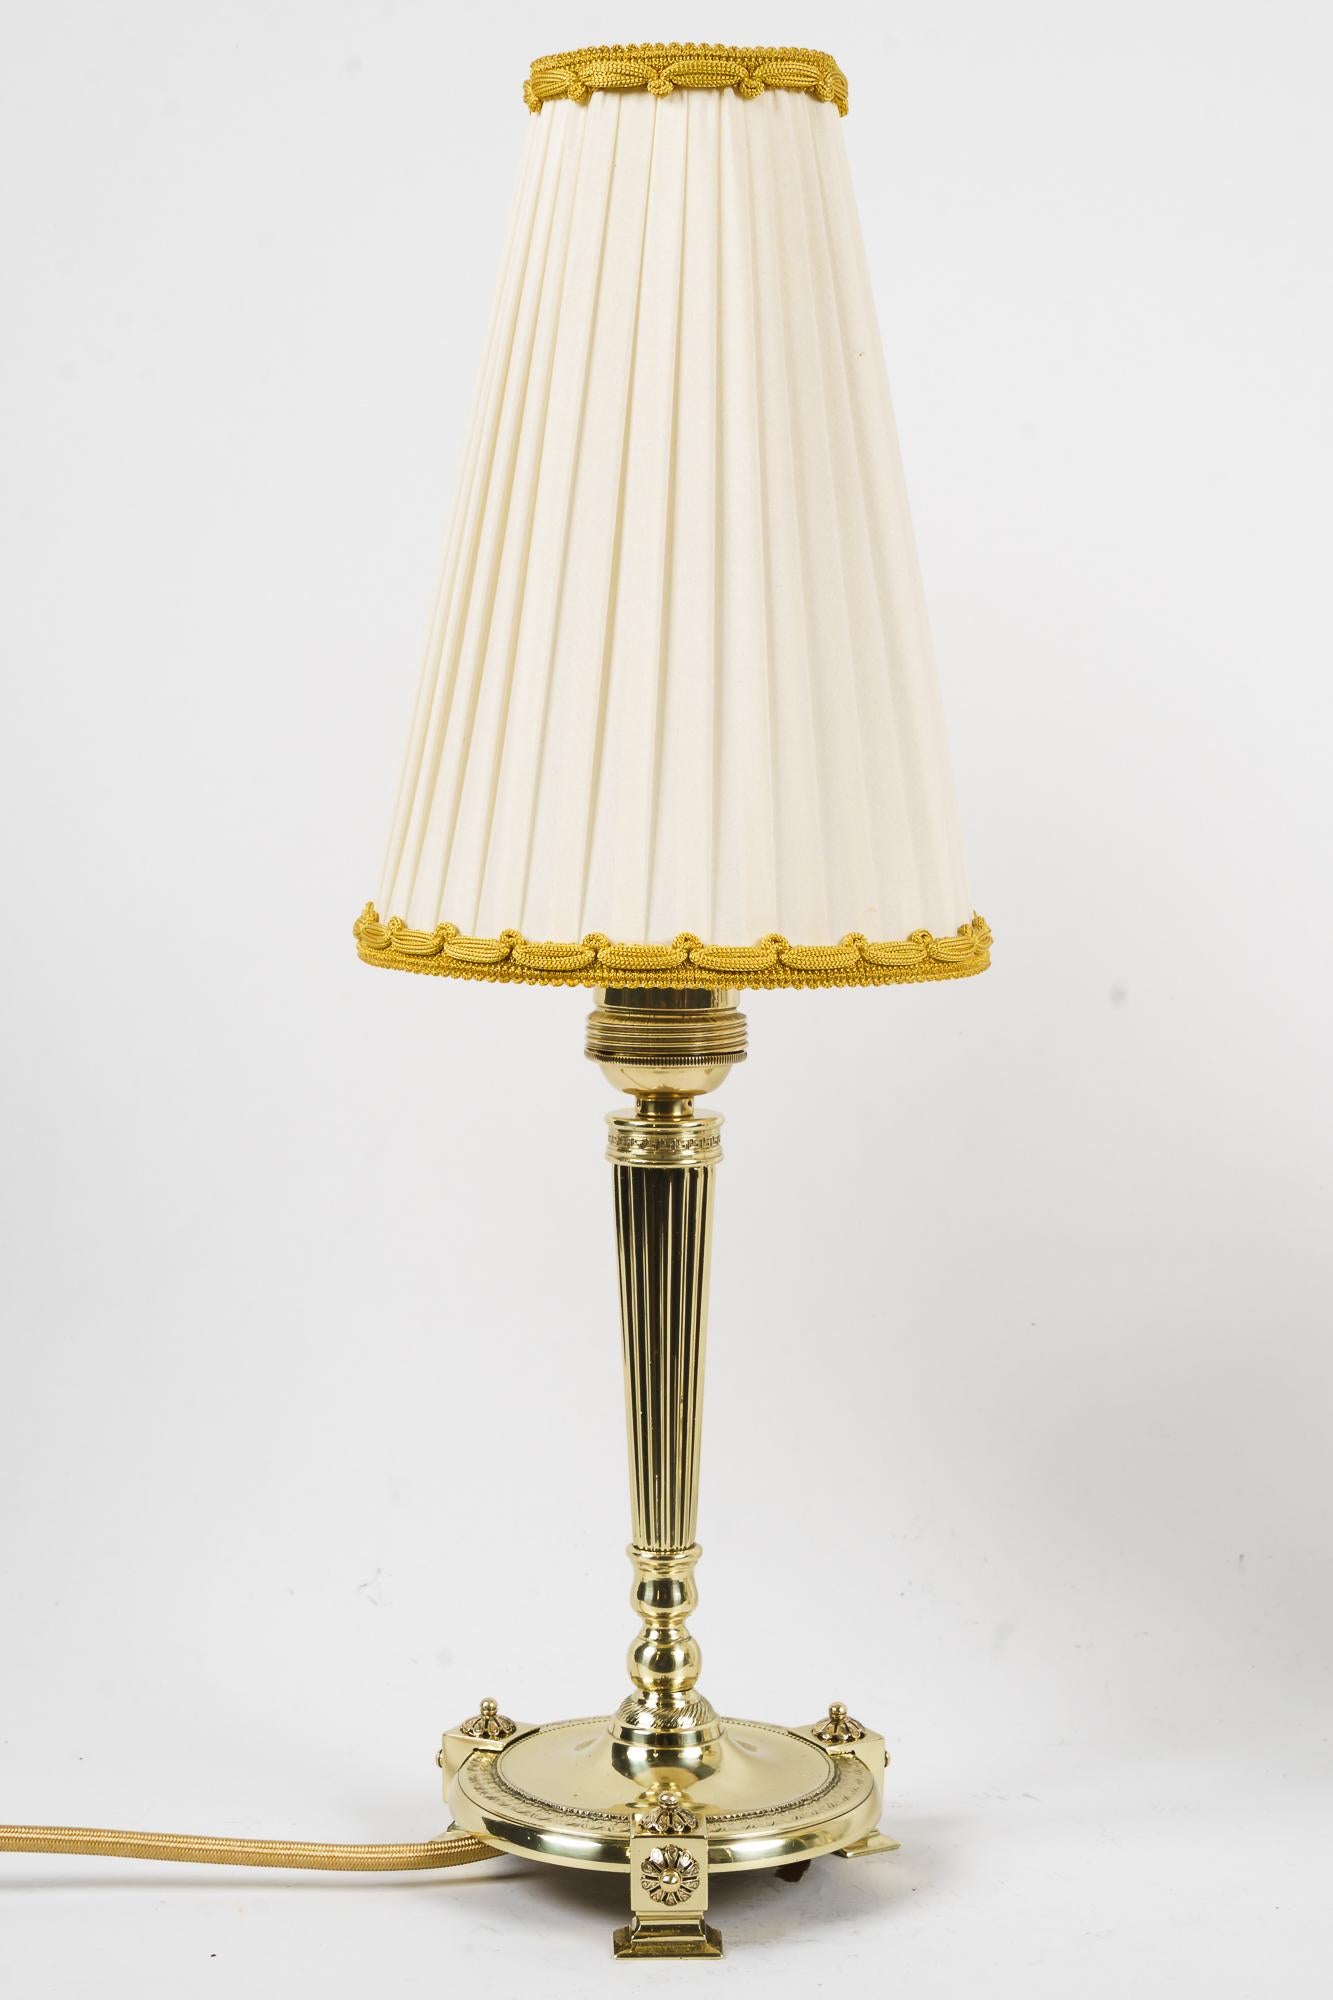 2 Art Deco table lamps Vienna 1920s
Polished and stove enameled
Original fabric shades.